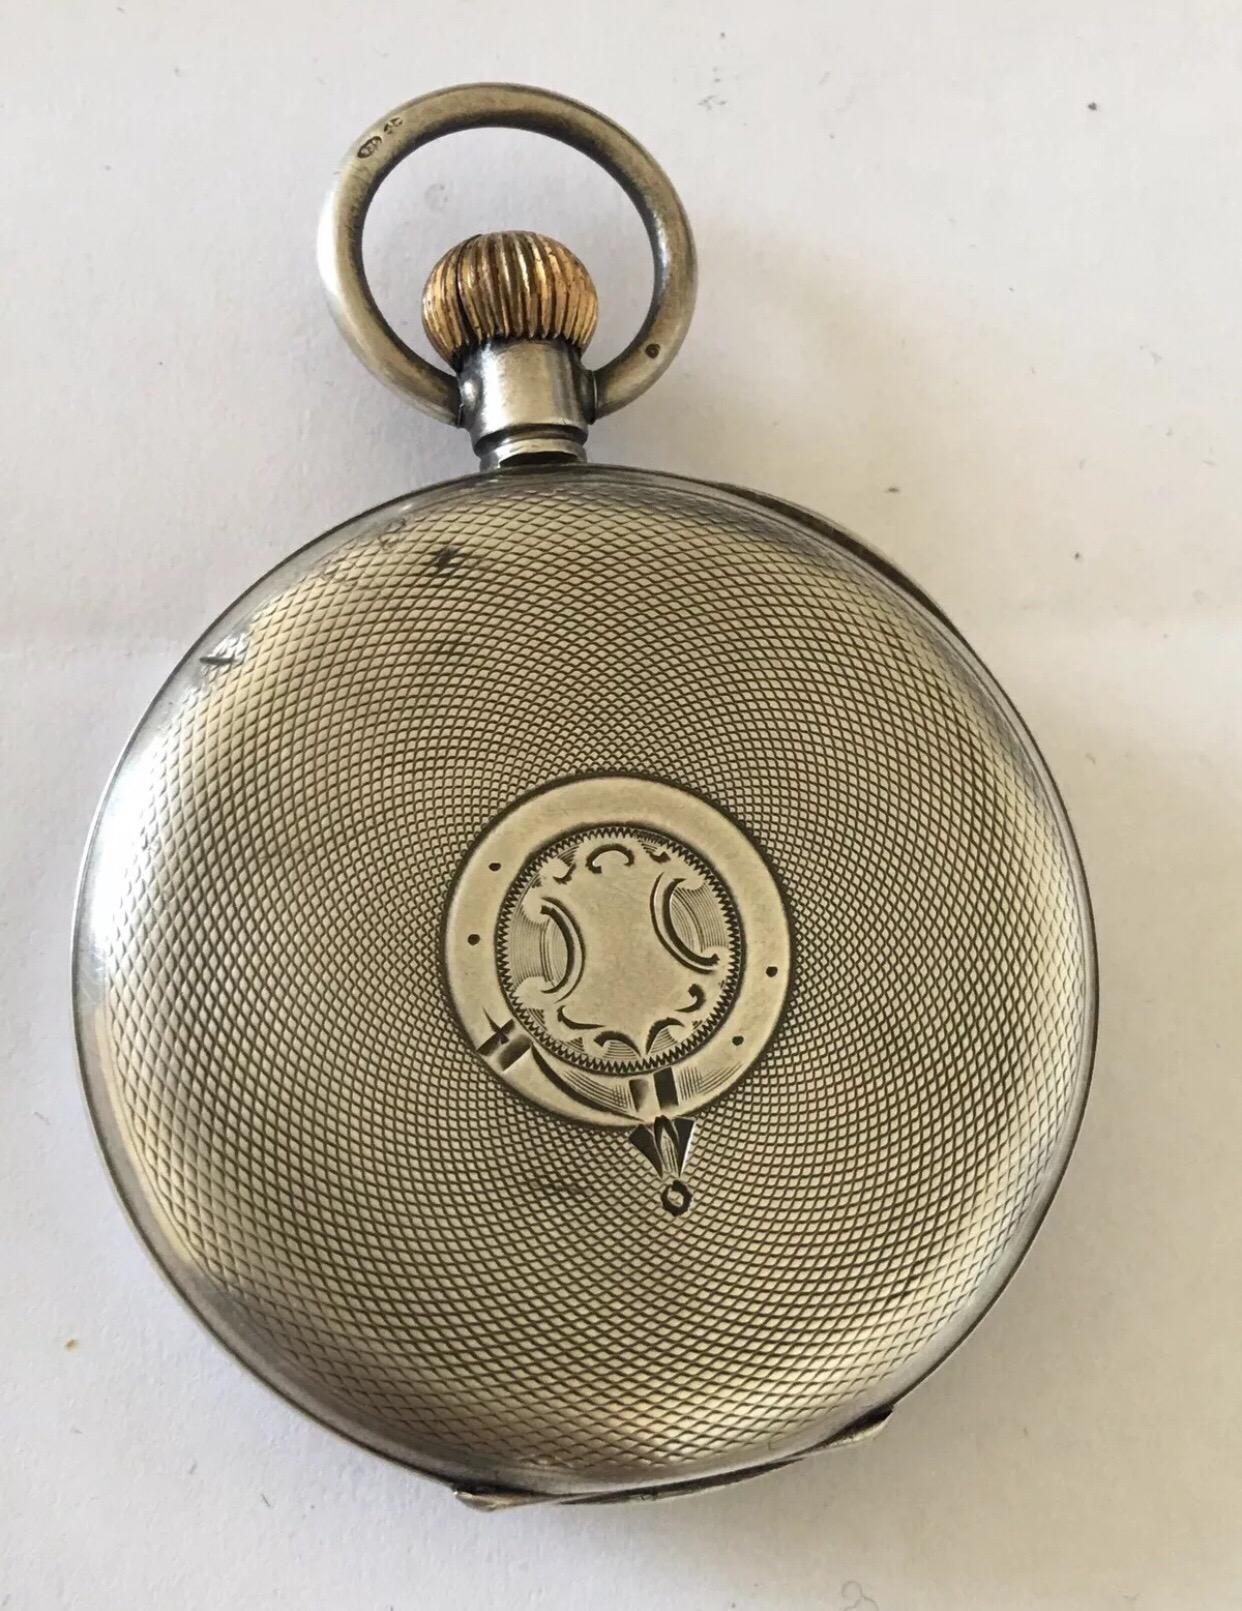 Antique Silver Swiss Made Pocket Watch Signed Kendal & Dent London, Makers to the Admiralty.

This watch is working and it is ticking nicely. The stem coating started to came off as seen on photos